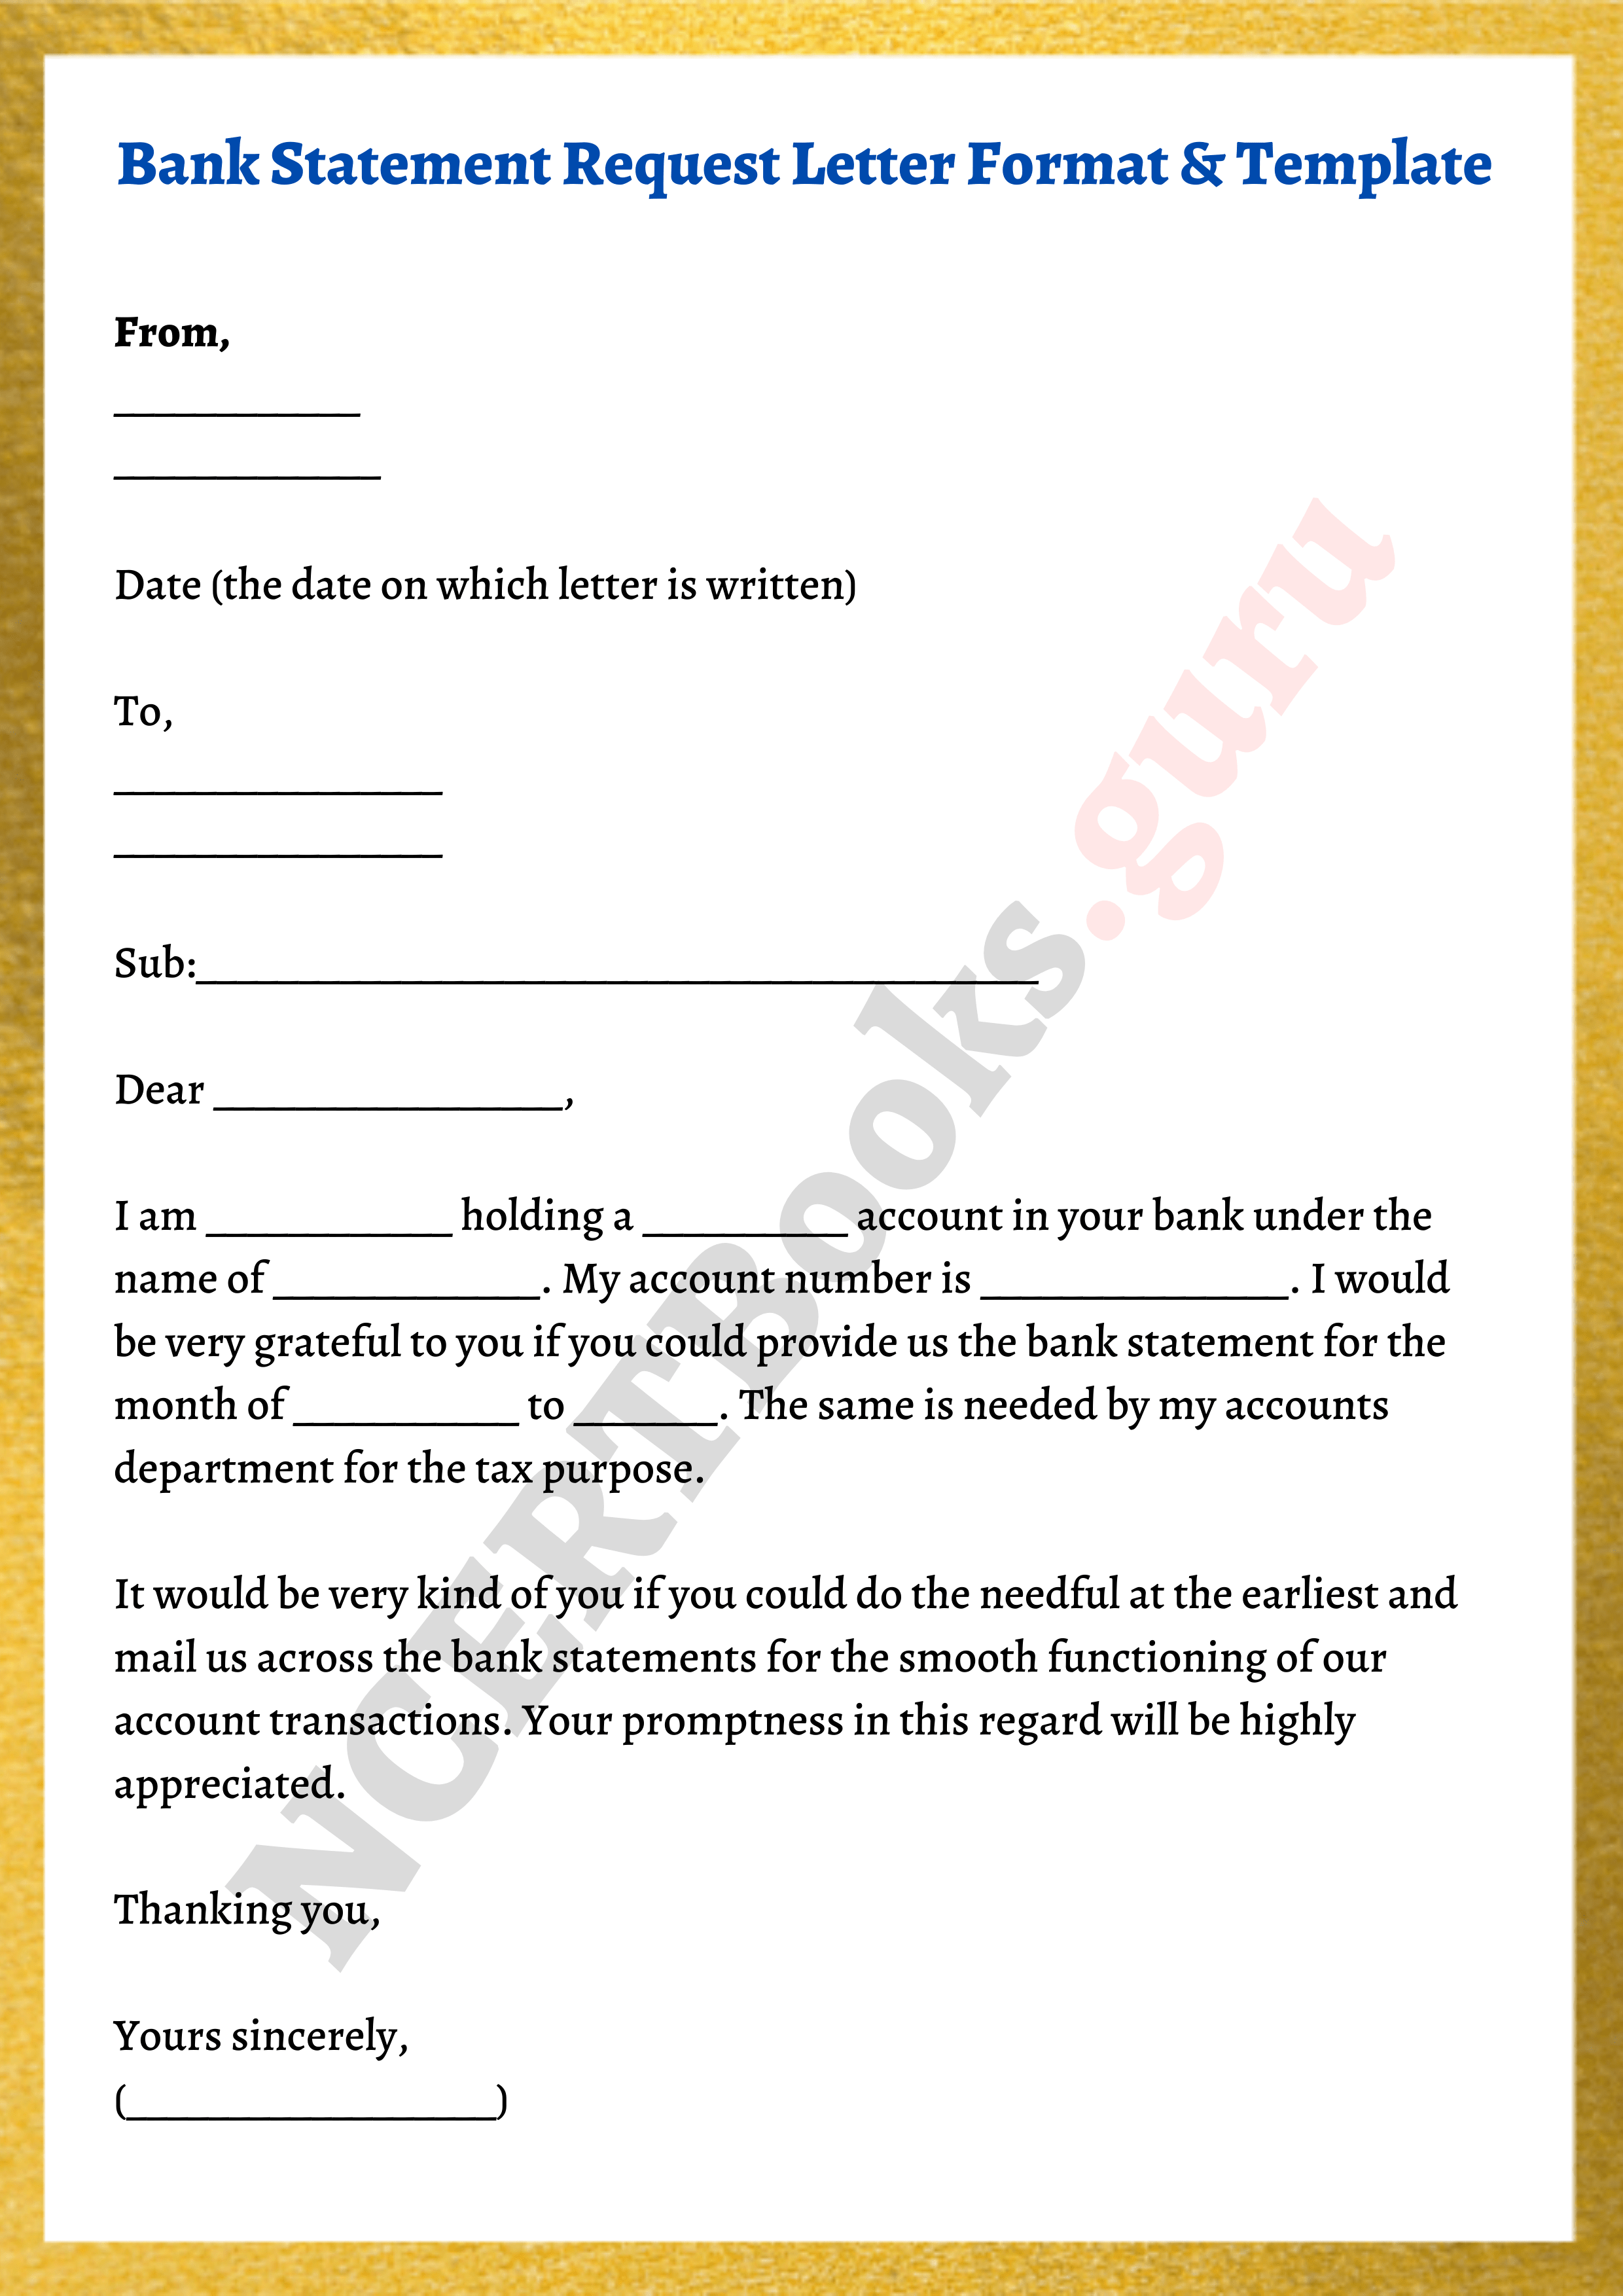 bank-statement-request-letter-template-format-samples-writing-tips